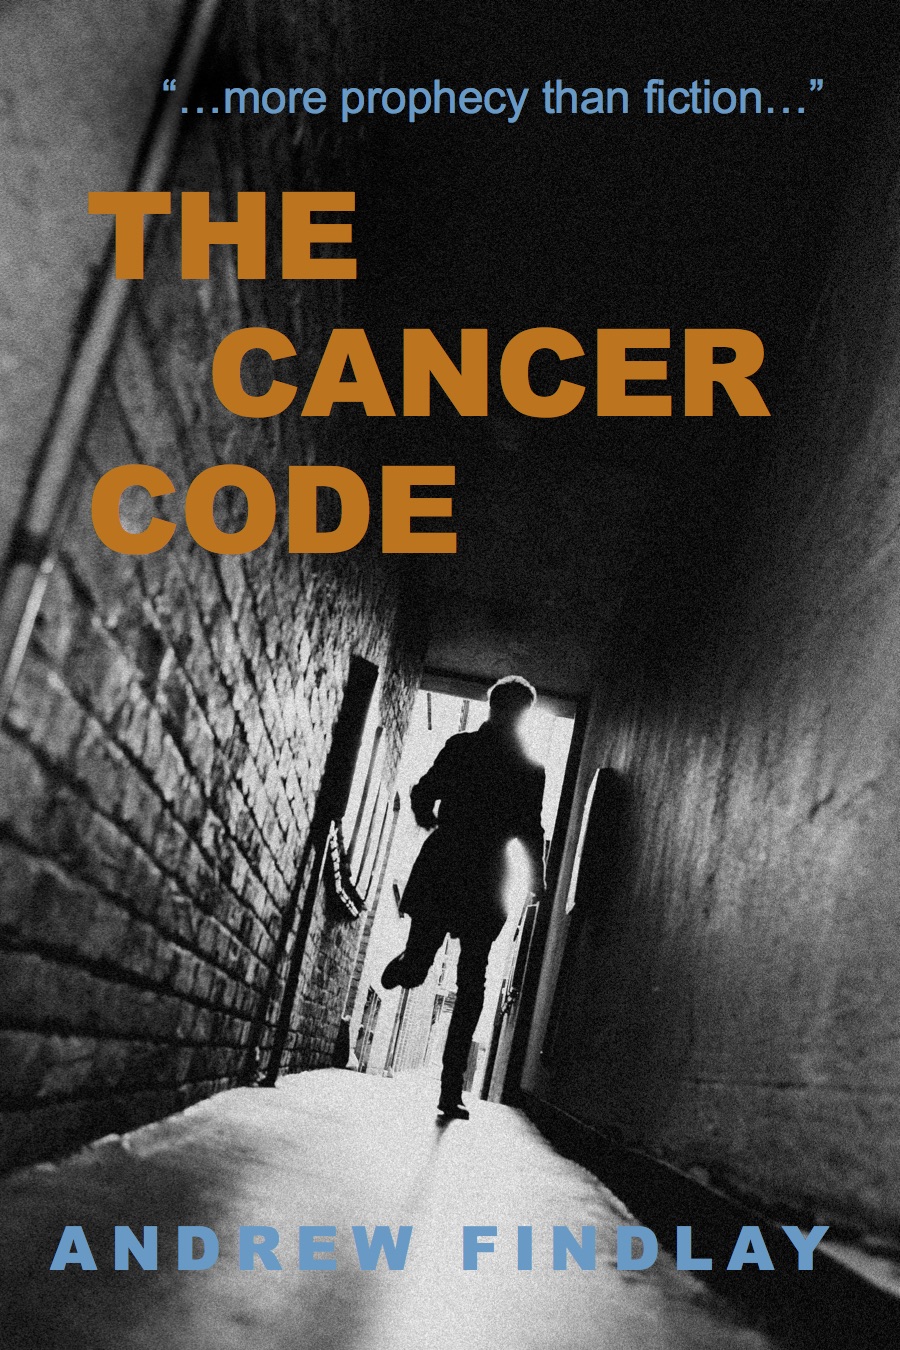 The Cancer Code by Andrew Findlay